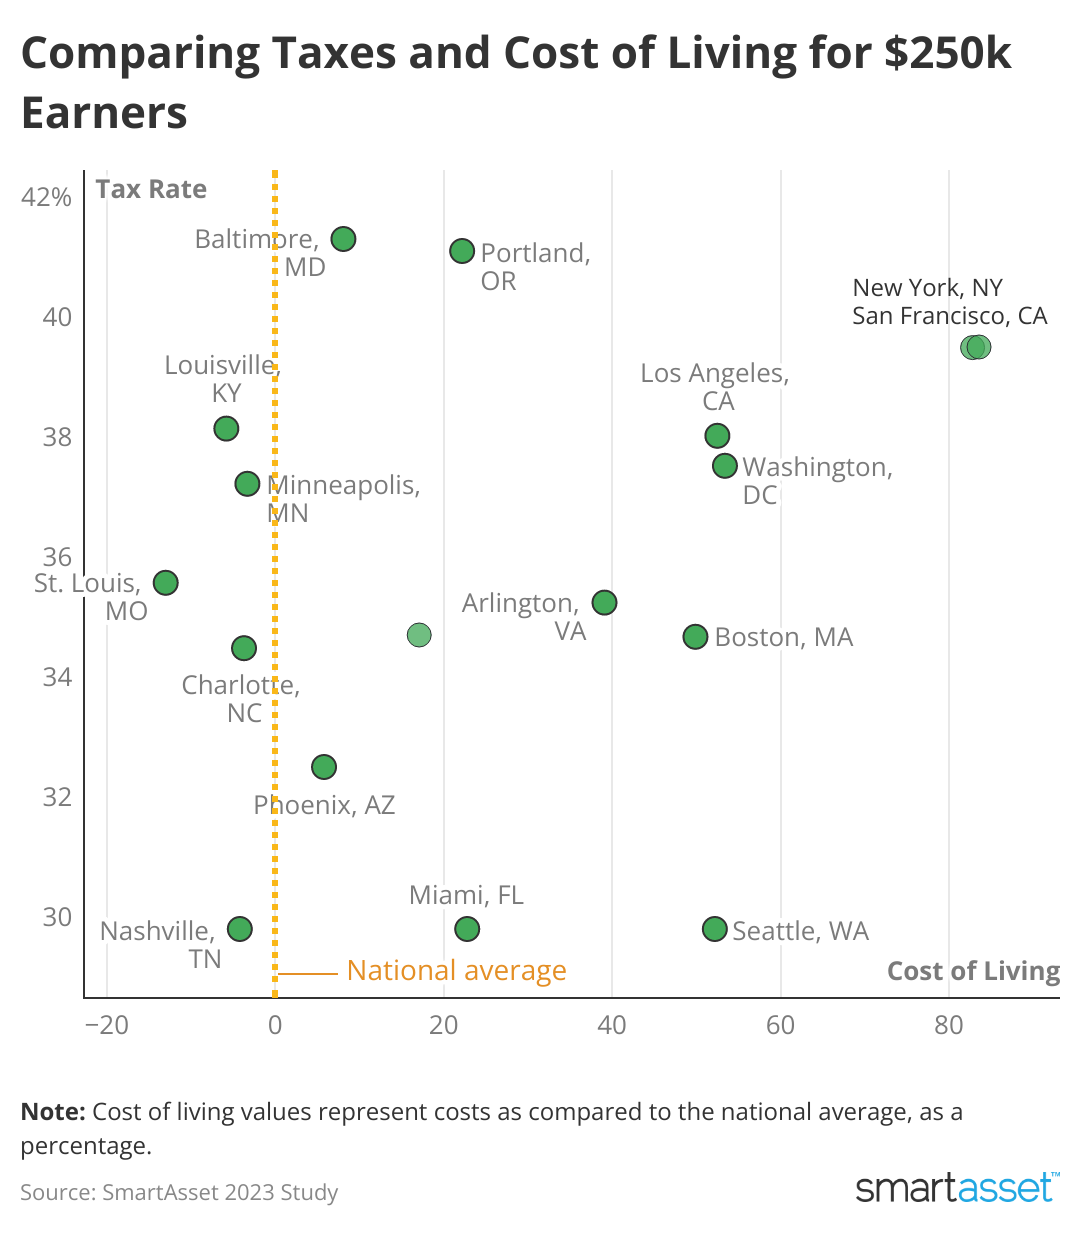 A scatterplot chart comparing the taxes and cost of living in various U.S. cities.